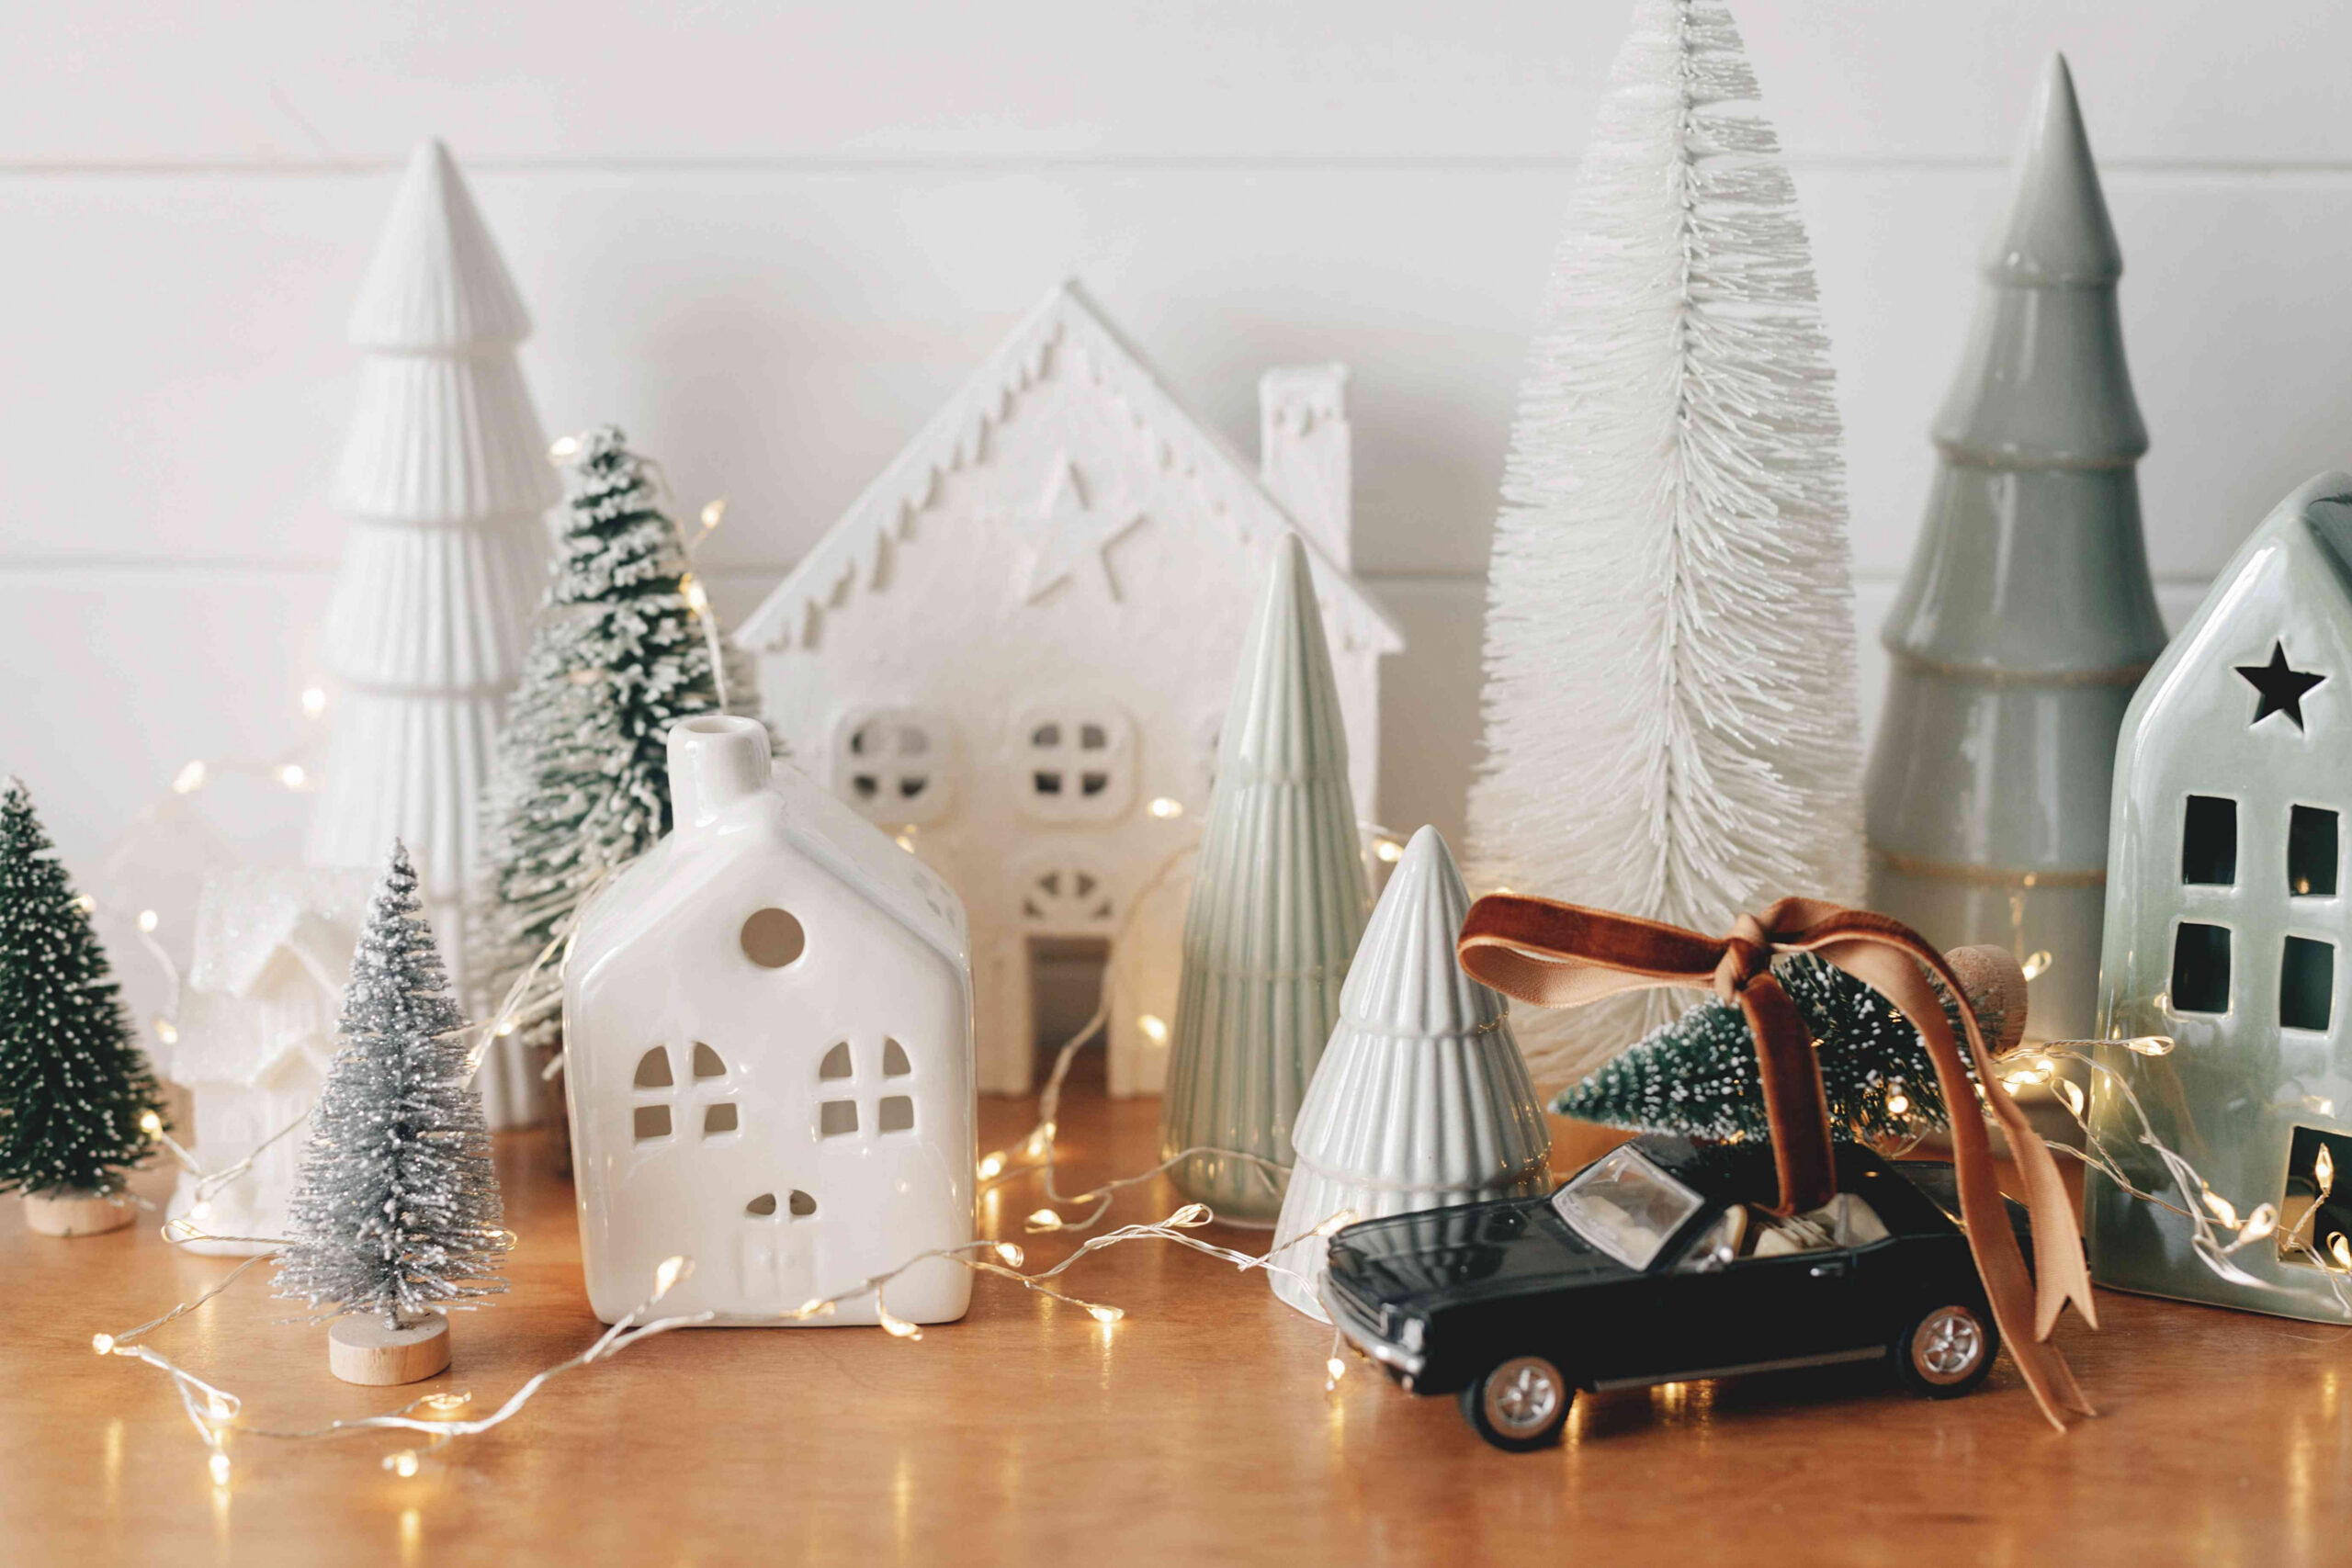 Christmas Village Display Ideas Your Whole Family Will Love